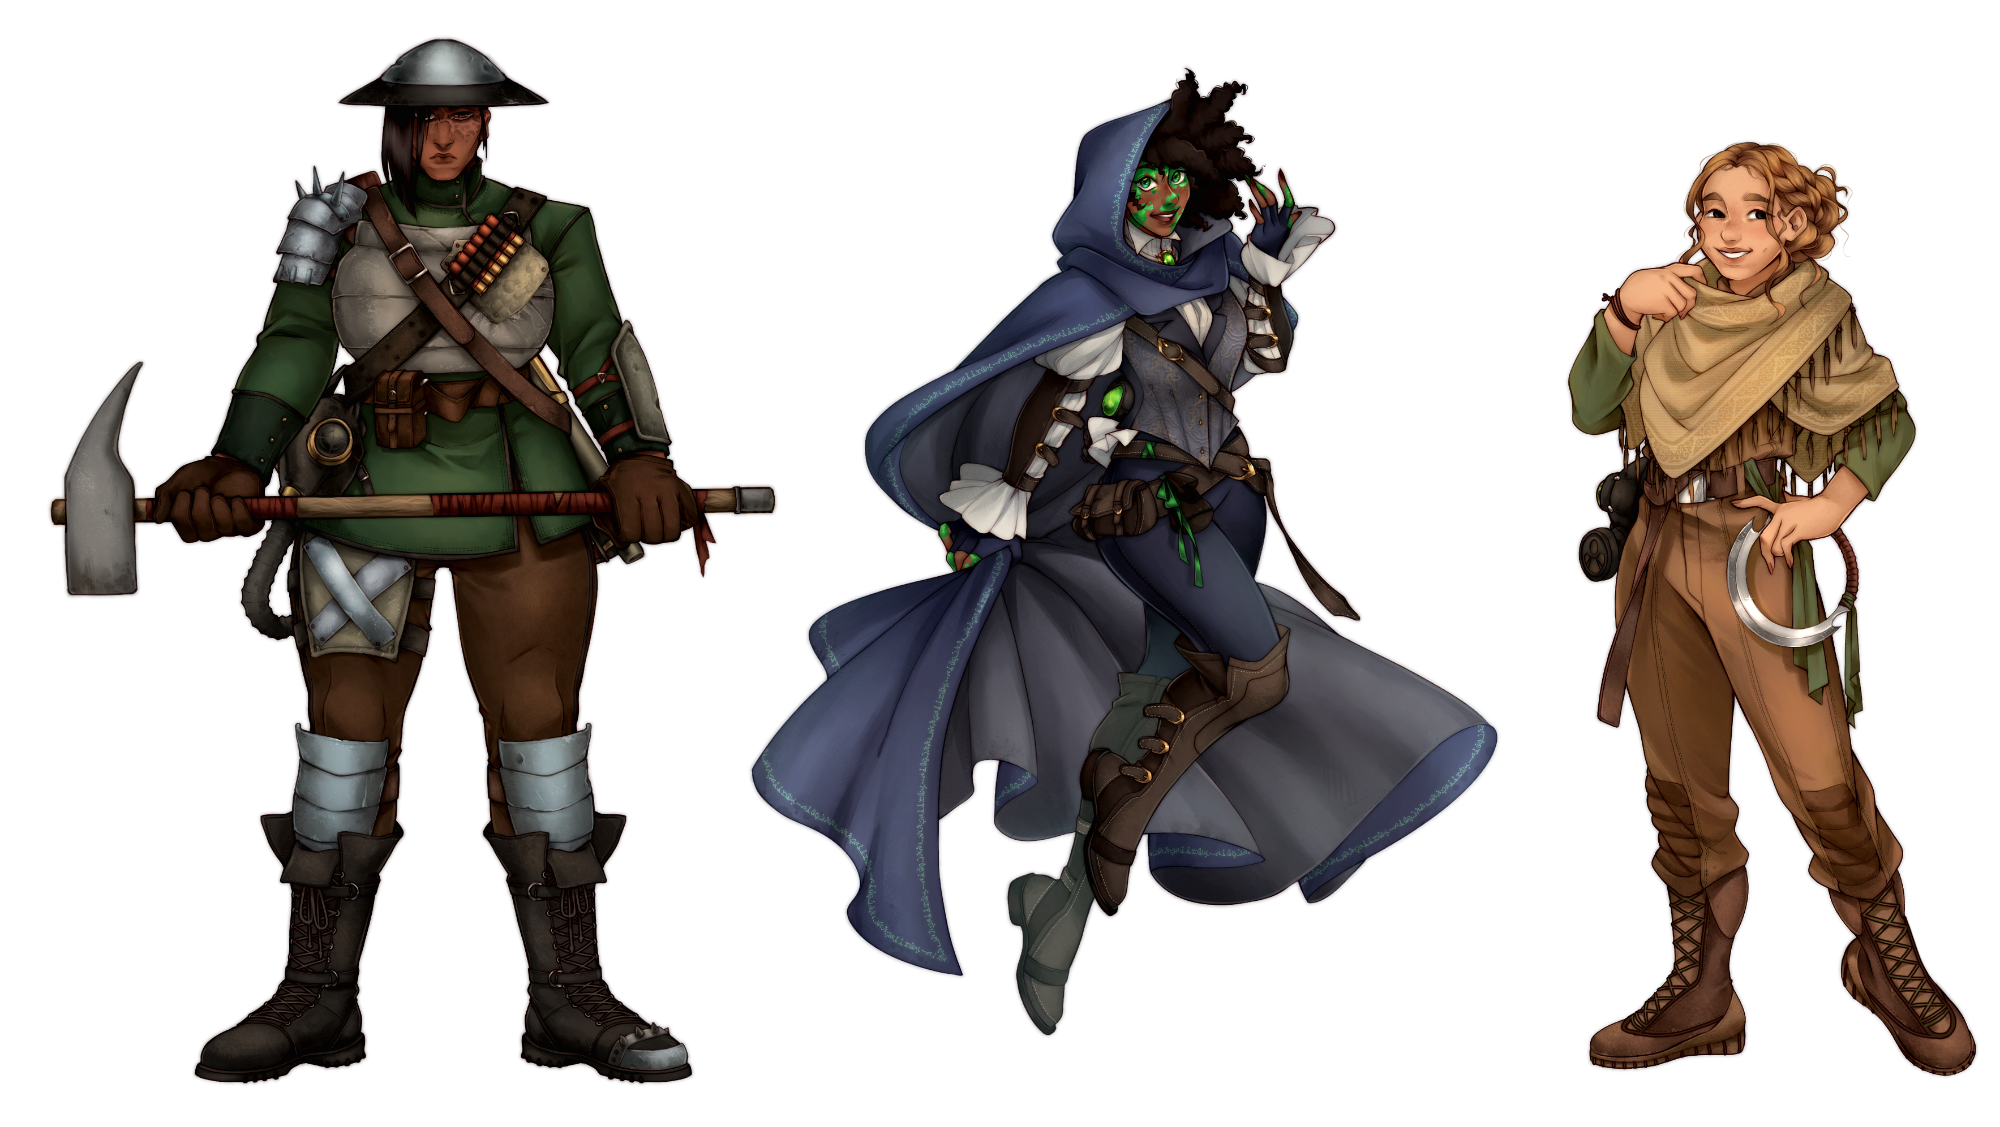 Three figures, from left: Ezri stands stolidly in armor with brown hair covering half of her face (the unscarred part) holding a large clawed sledgehammer. Ilsene in joyous motion with billowing cloak and thieve's gear. Her hair poking out of her hood above her face which highlights the her green eyes and matching vitiligo against her dark skin. Magpie looking playful in earthtones that align with her light brown hair, pulled back and curled tresses falling on either side of her face, wearing a sisk at her side. All three carry gas masks at their belts.